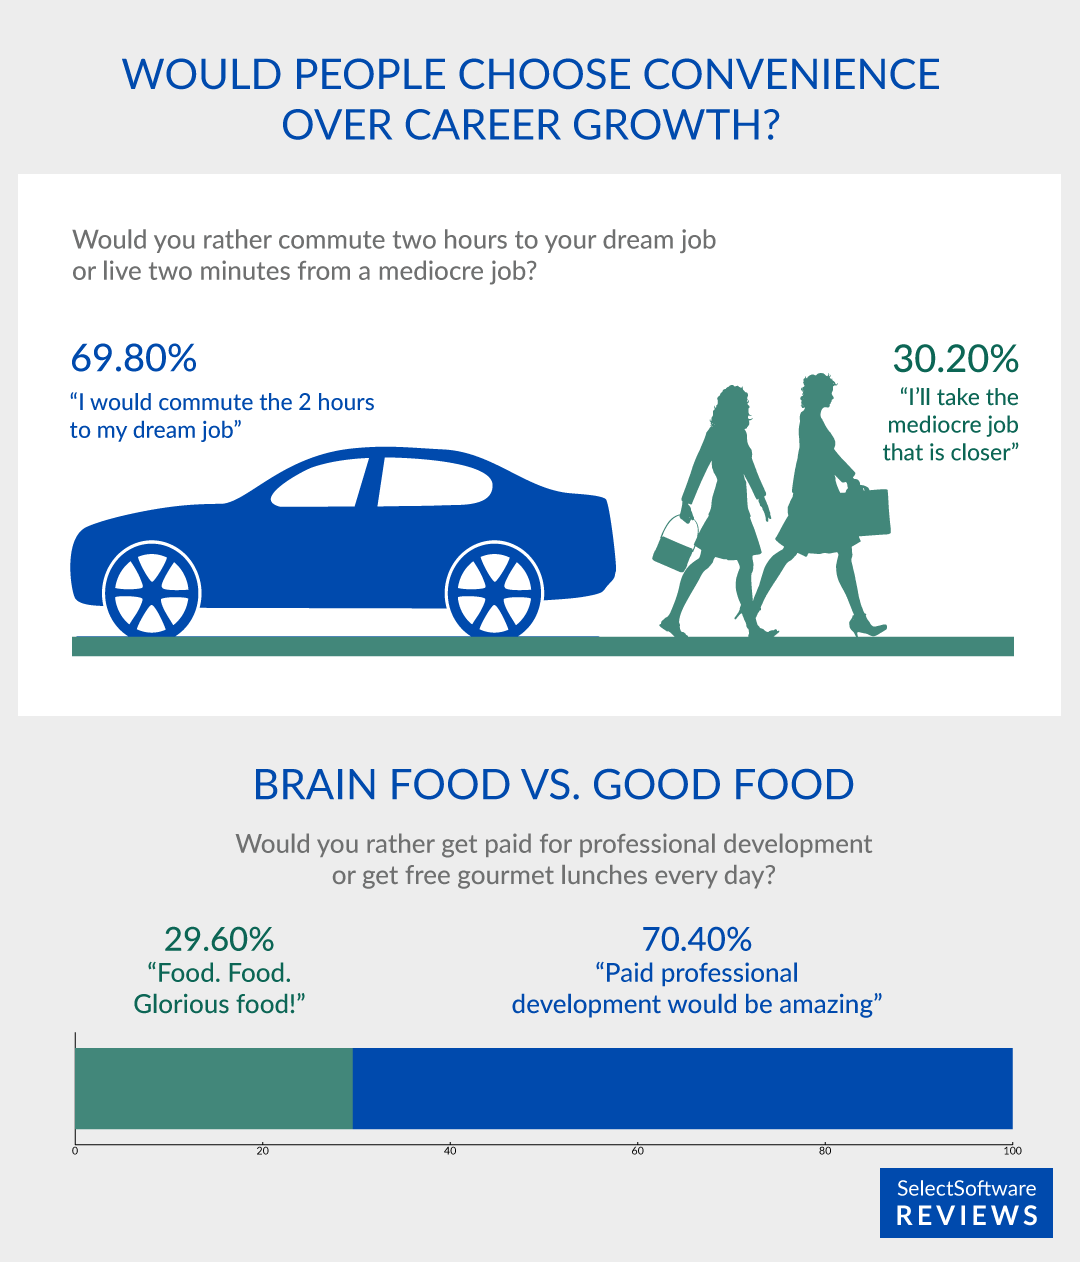 Survey responses about career growth opportunities.